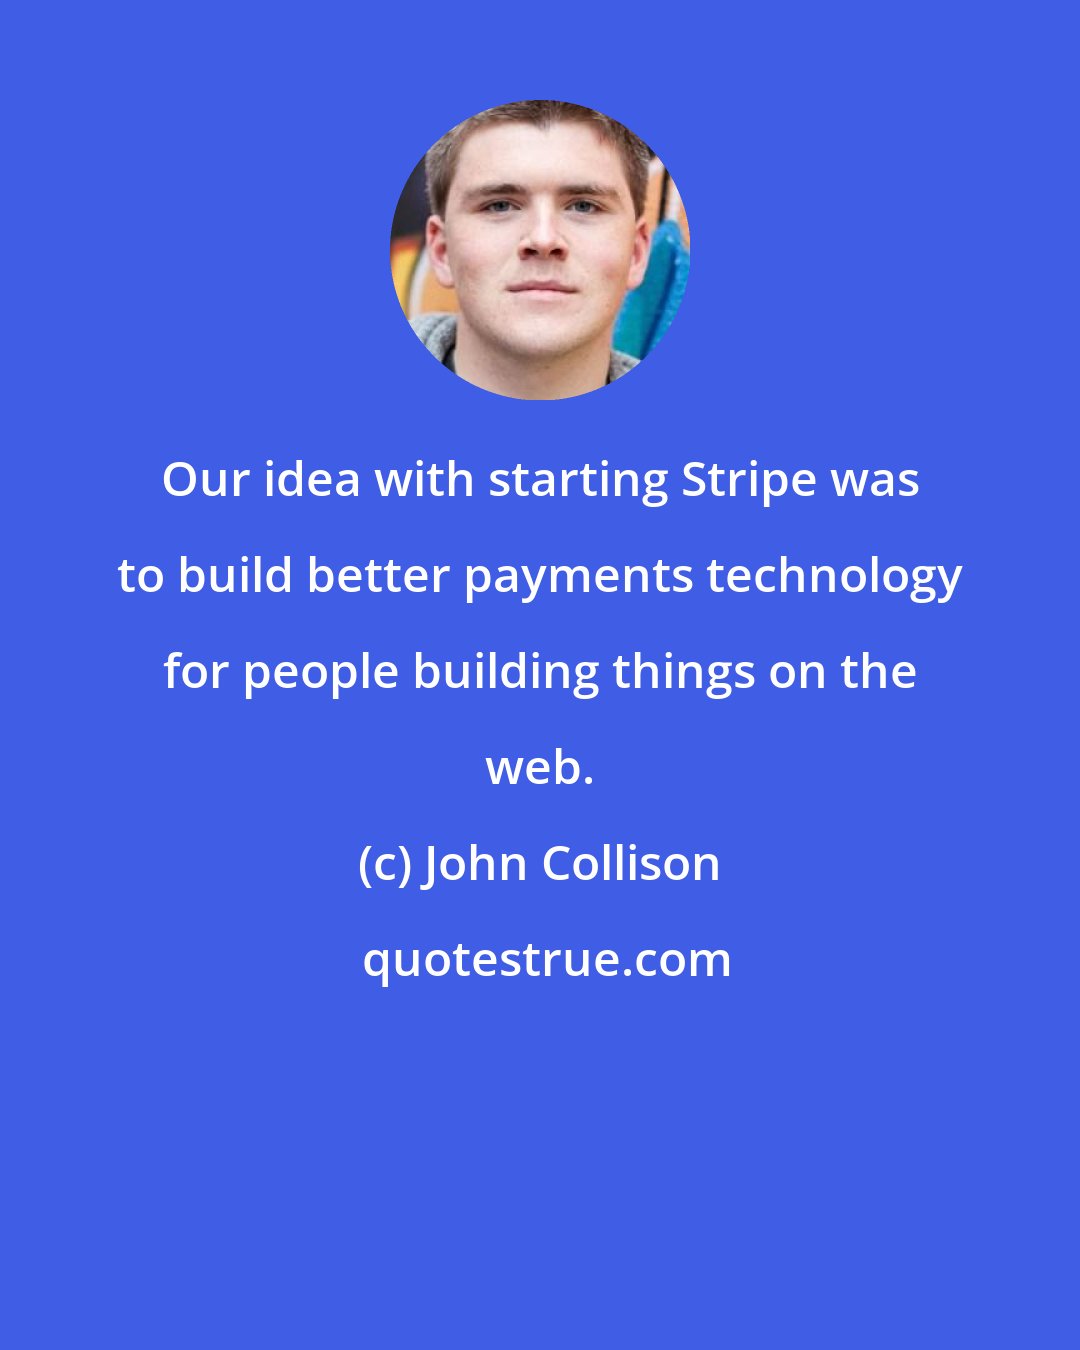 John Collison: Our idea with starting Stripe was to build better payments technology for people building things on the web.